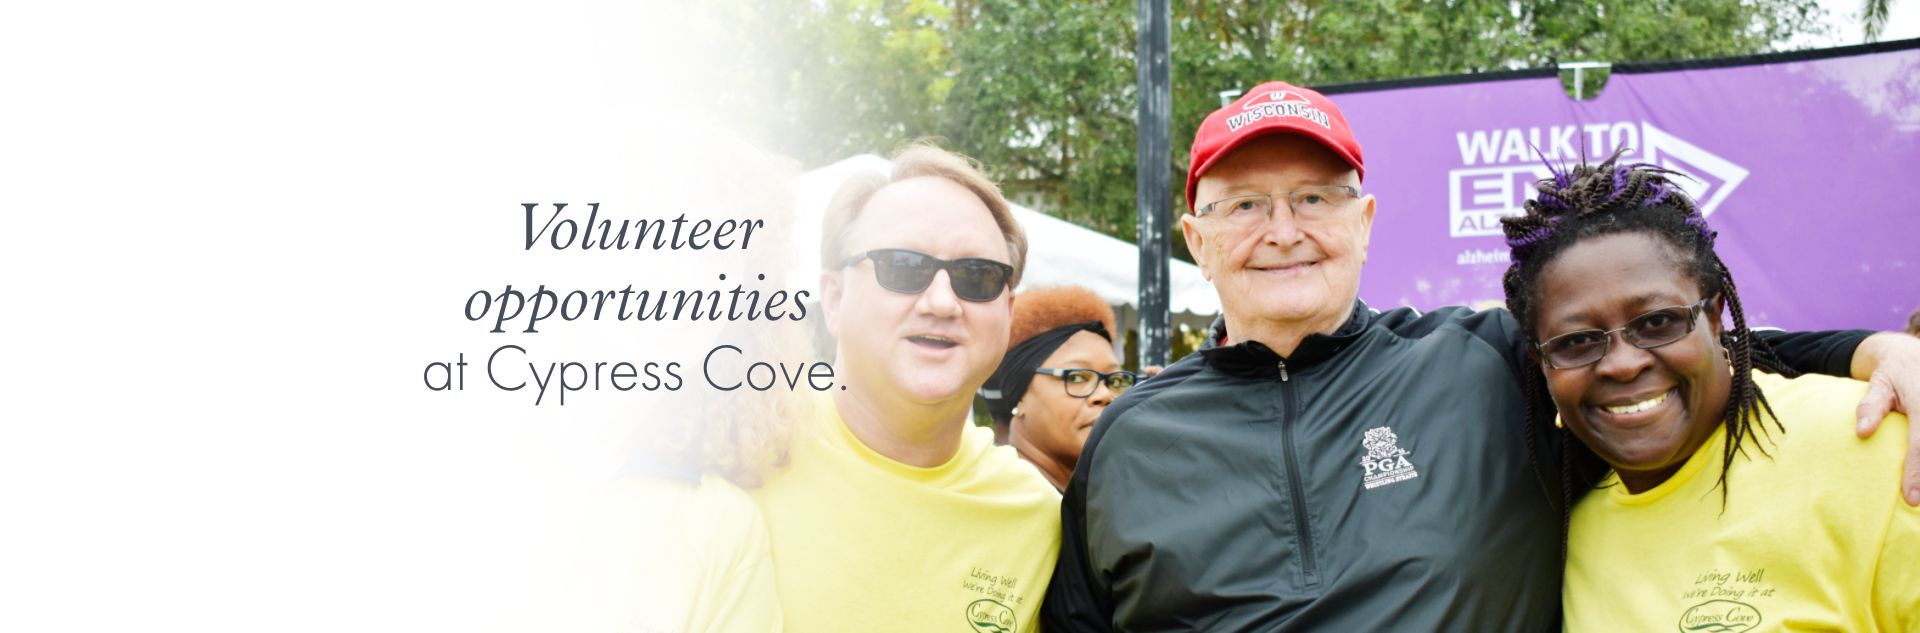 Volunteer opportunities at Cypress Cove.